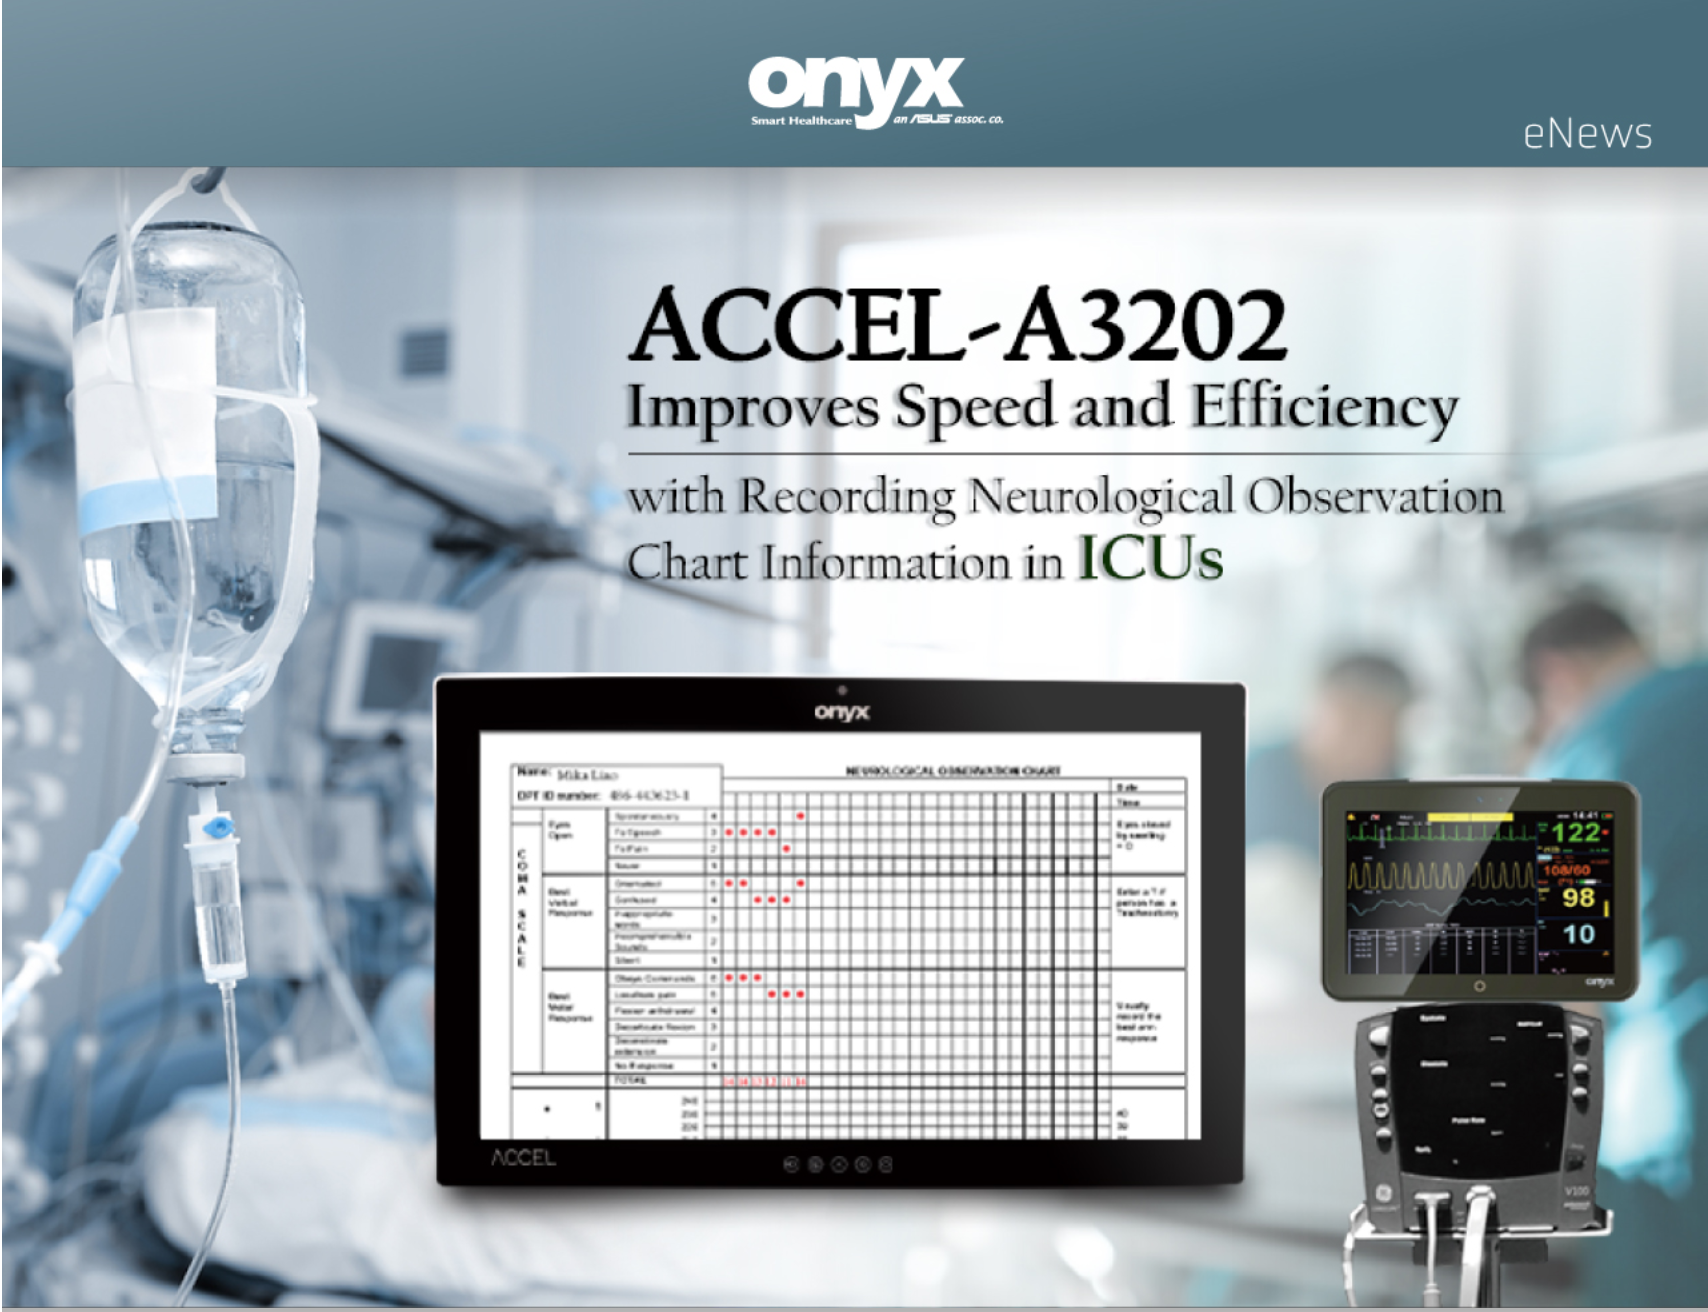 ACCEL-A3202 Improves speed and efficiency